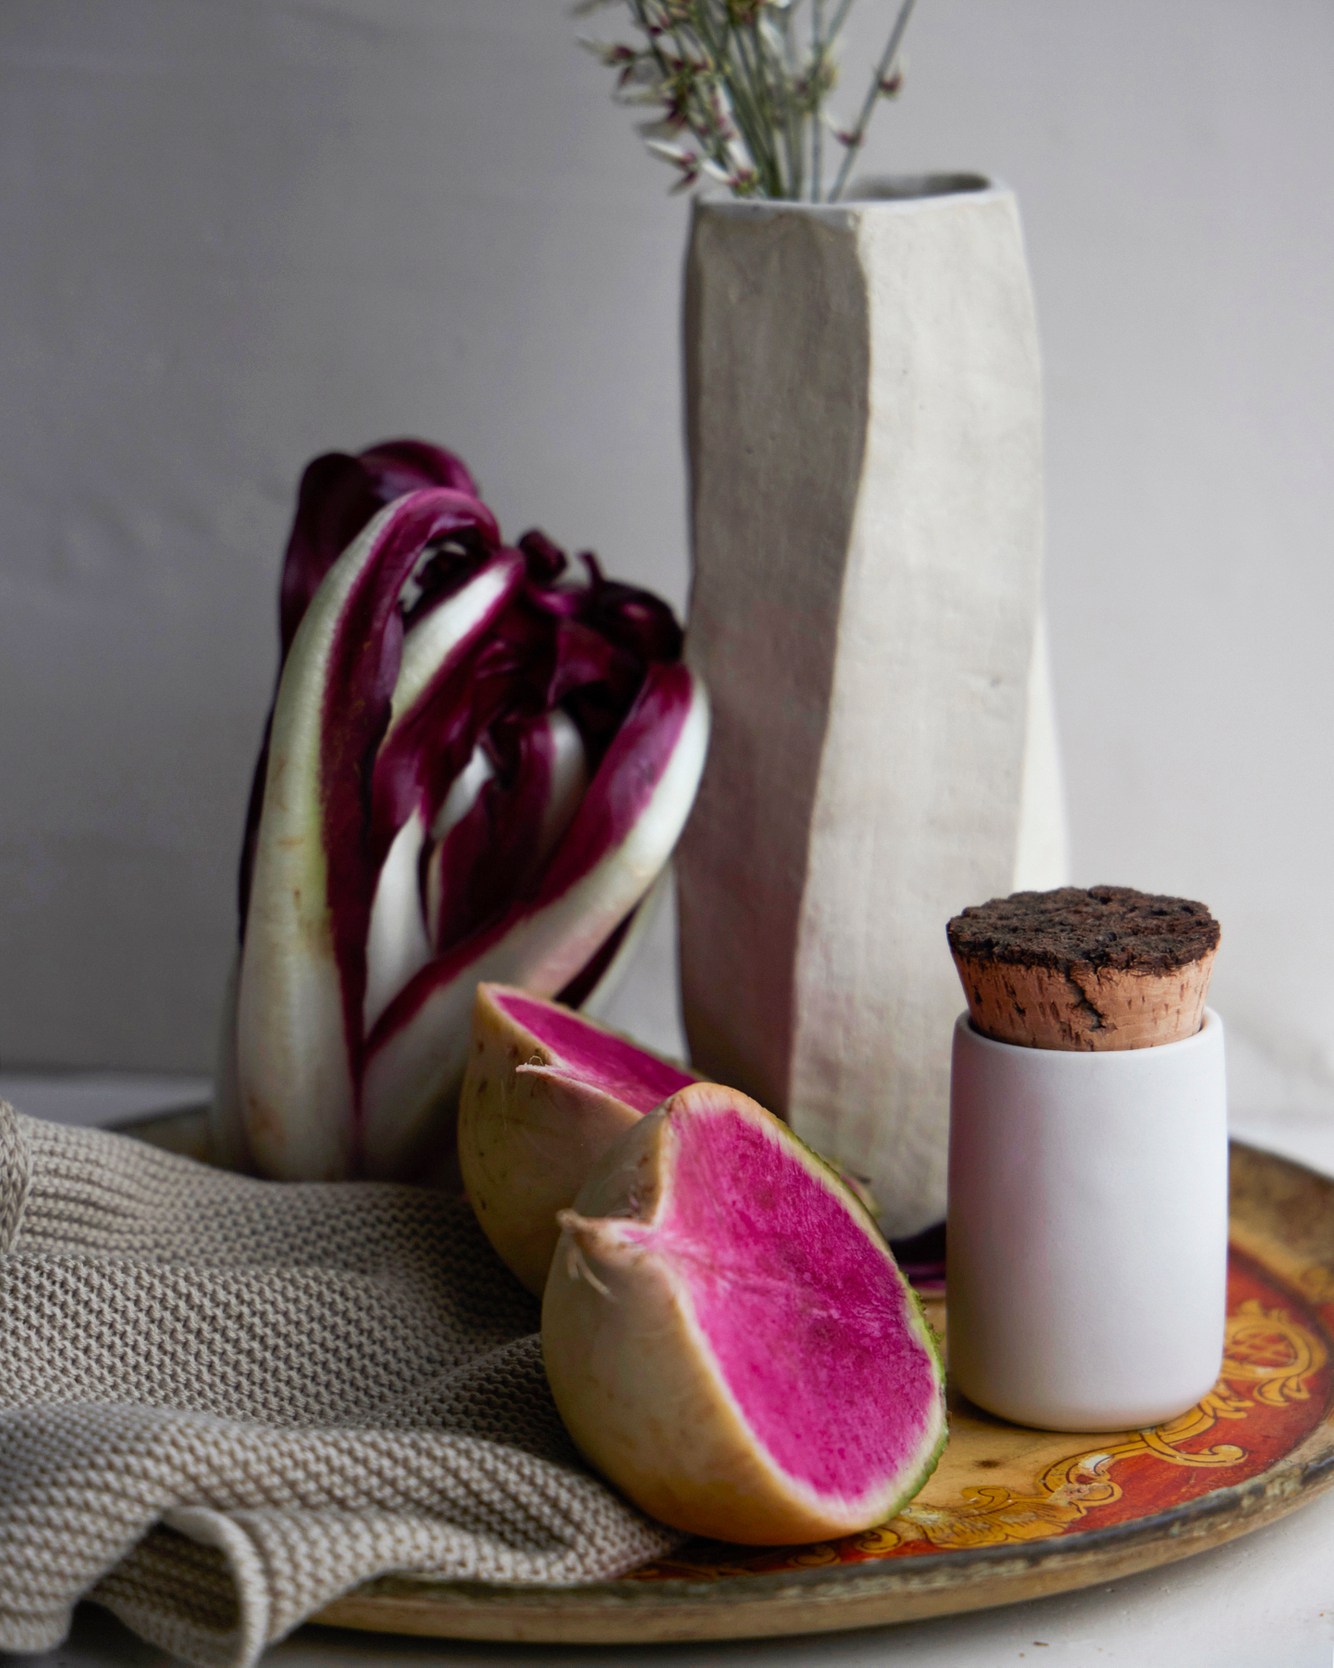 Sculptural vase sits on an antique circular food tray with to vegetables and a spice jar